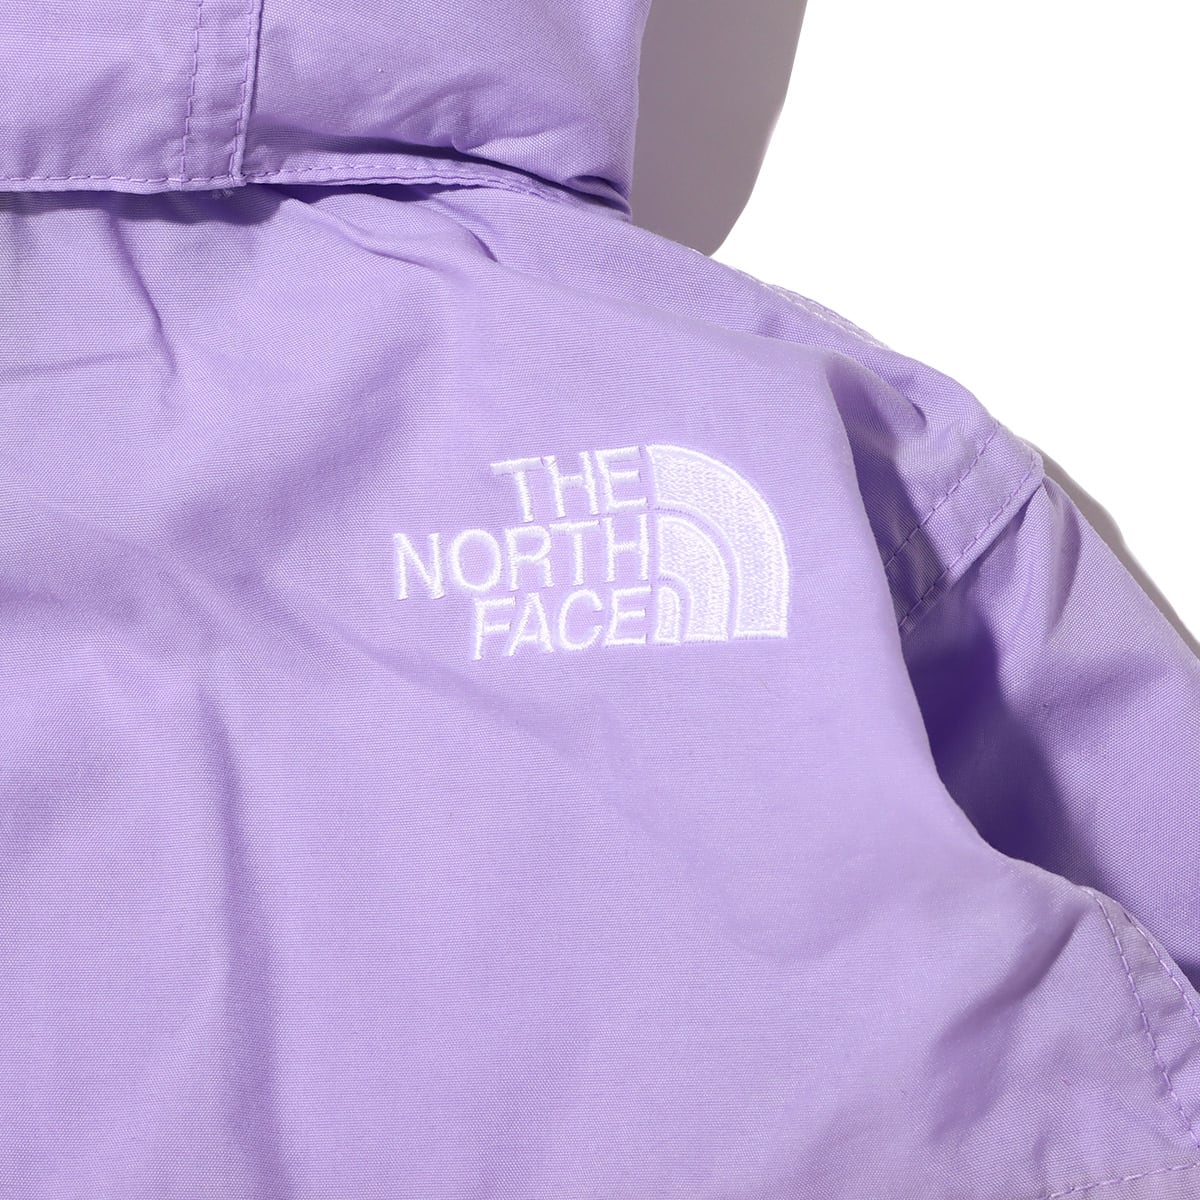 THE NORTH FACE B COMPACT JACKET ラベンダーxケルプタン 23SS-I